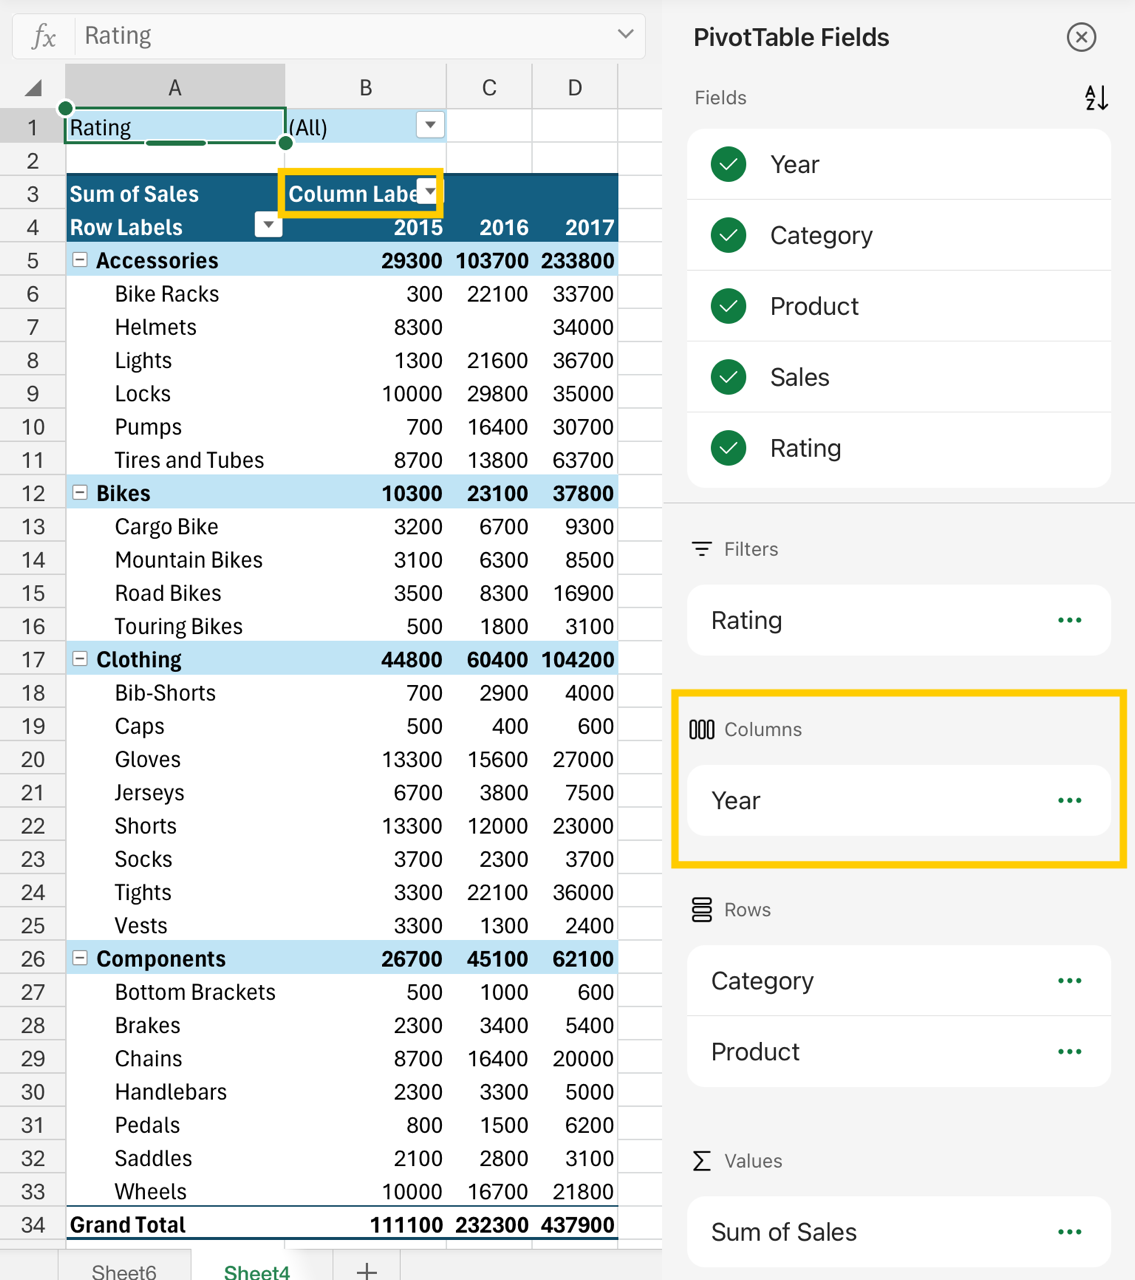 Image of the columns area in the field list and column labels in the PivotTable